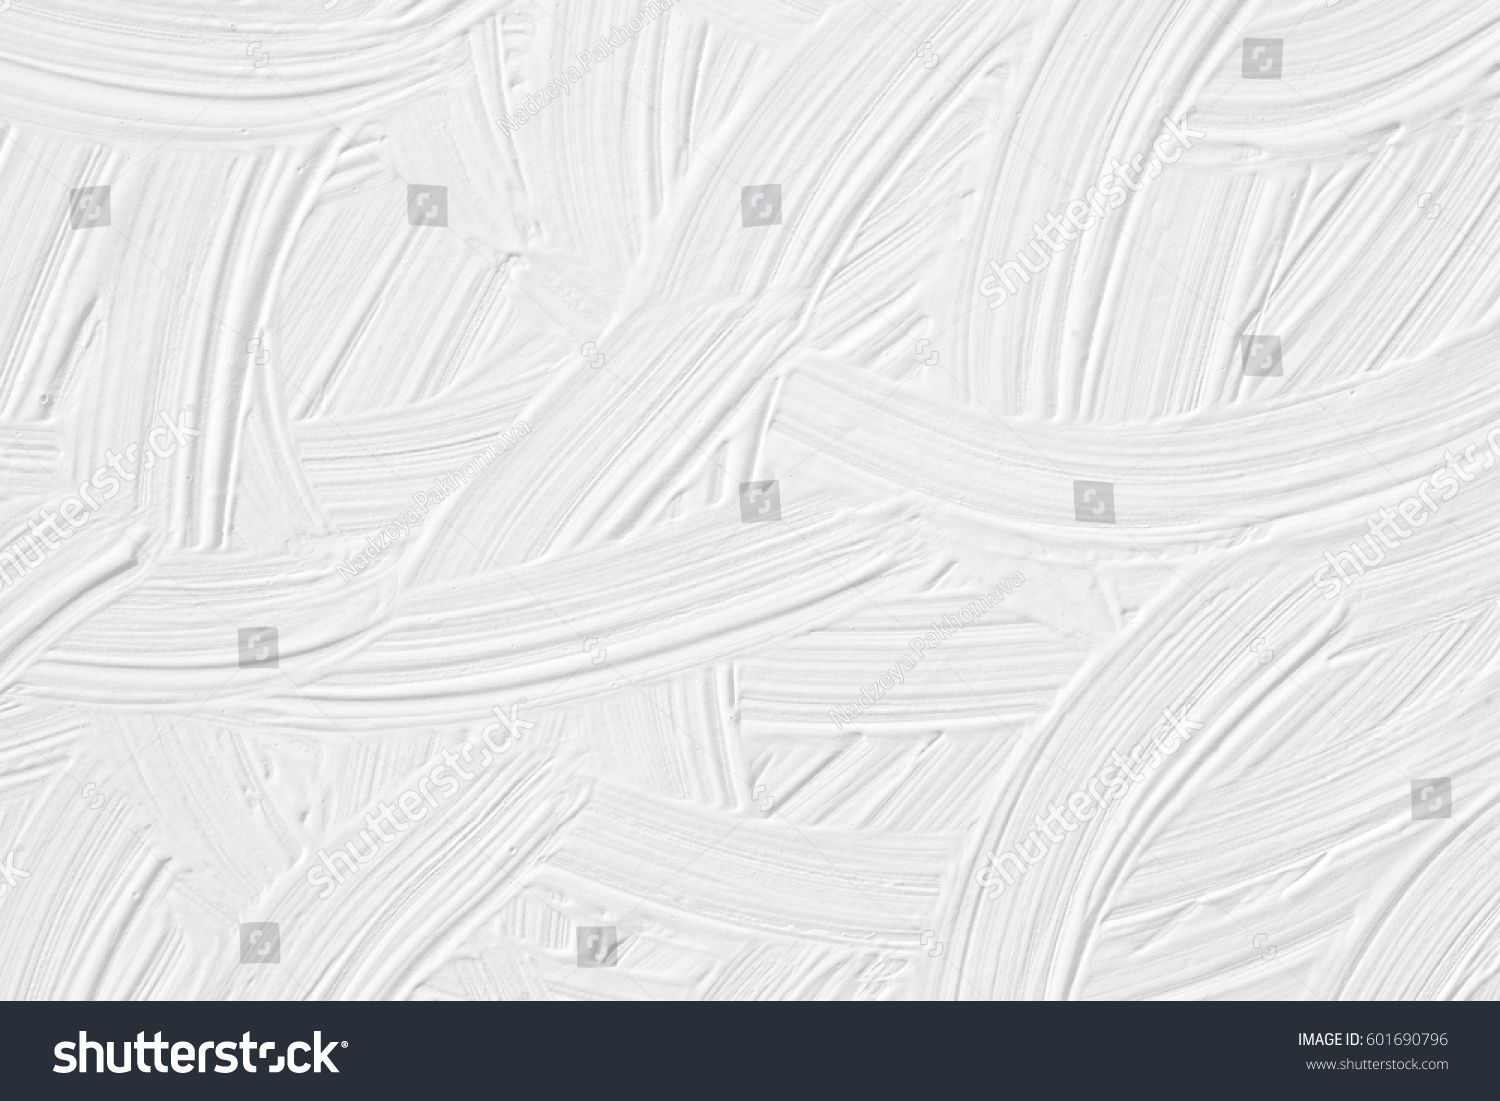 White paint texture with a pattern of grass and leaves. Background for wallpaper and cards. Wedding look. #601690796